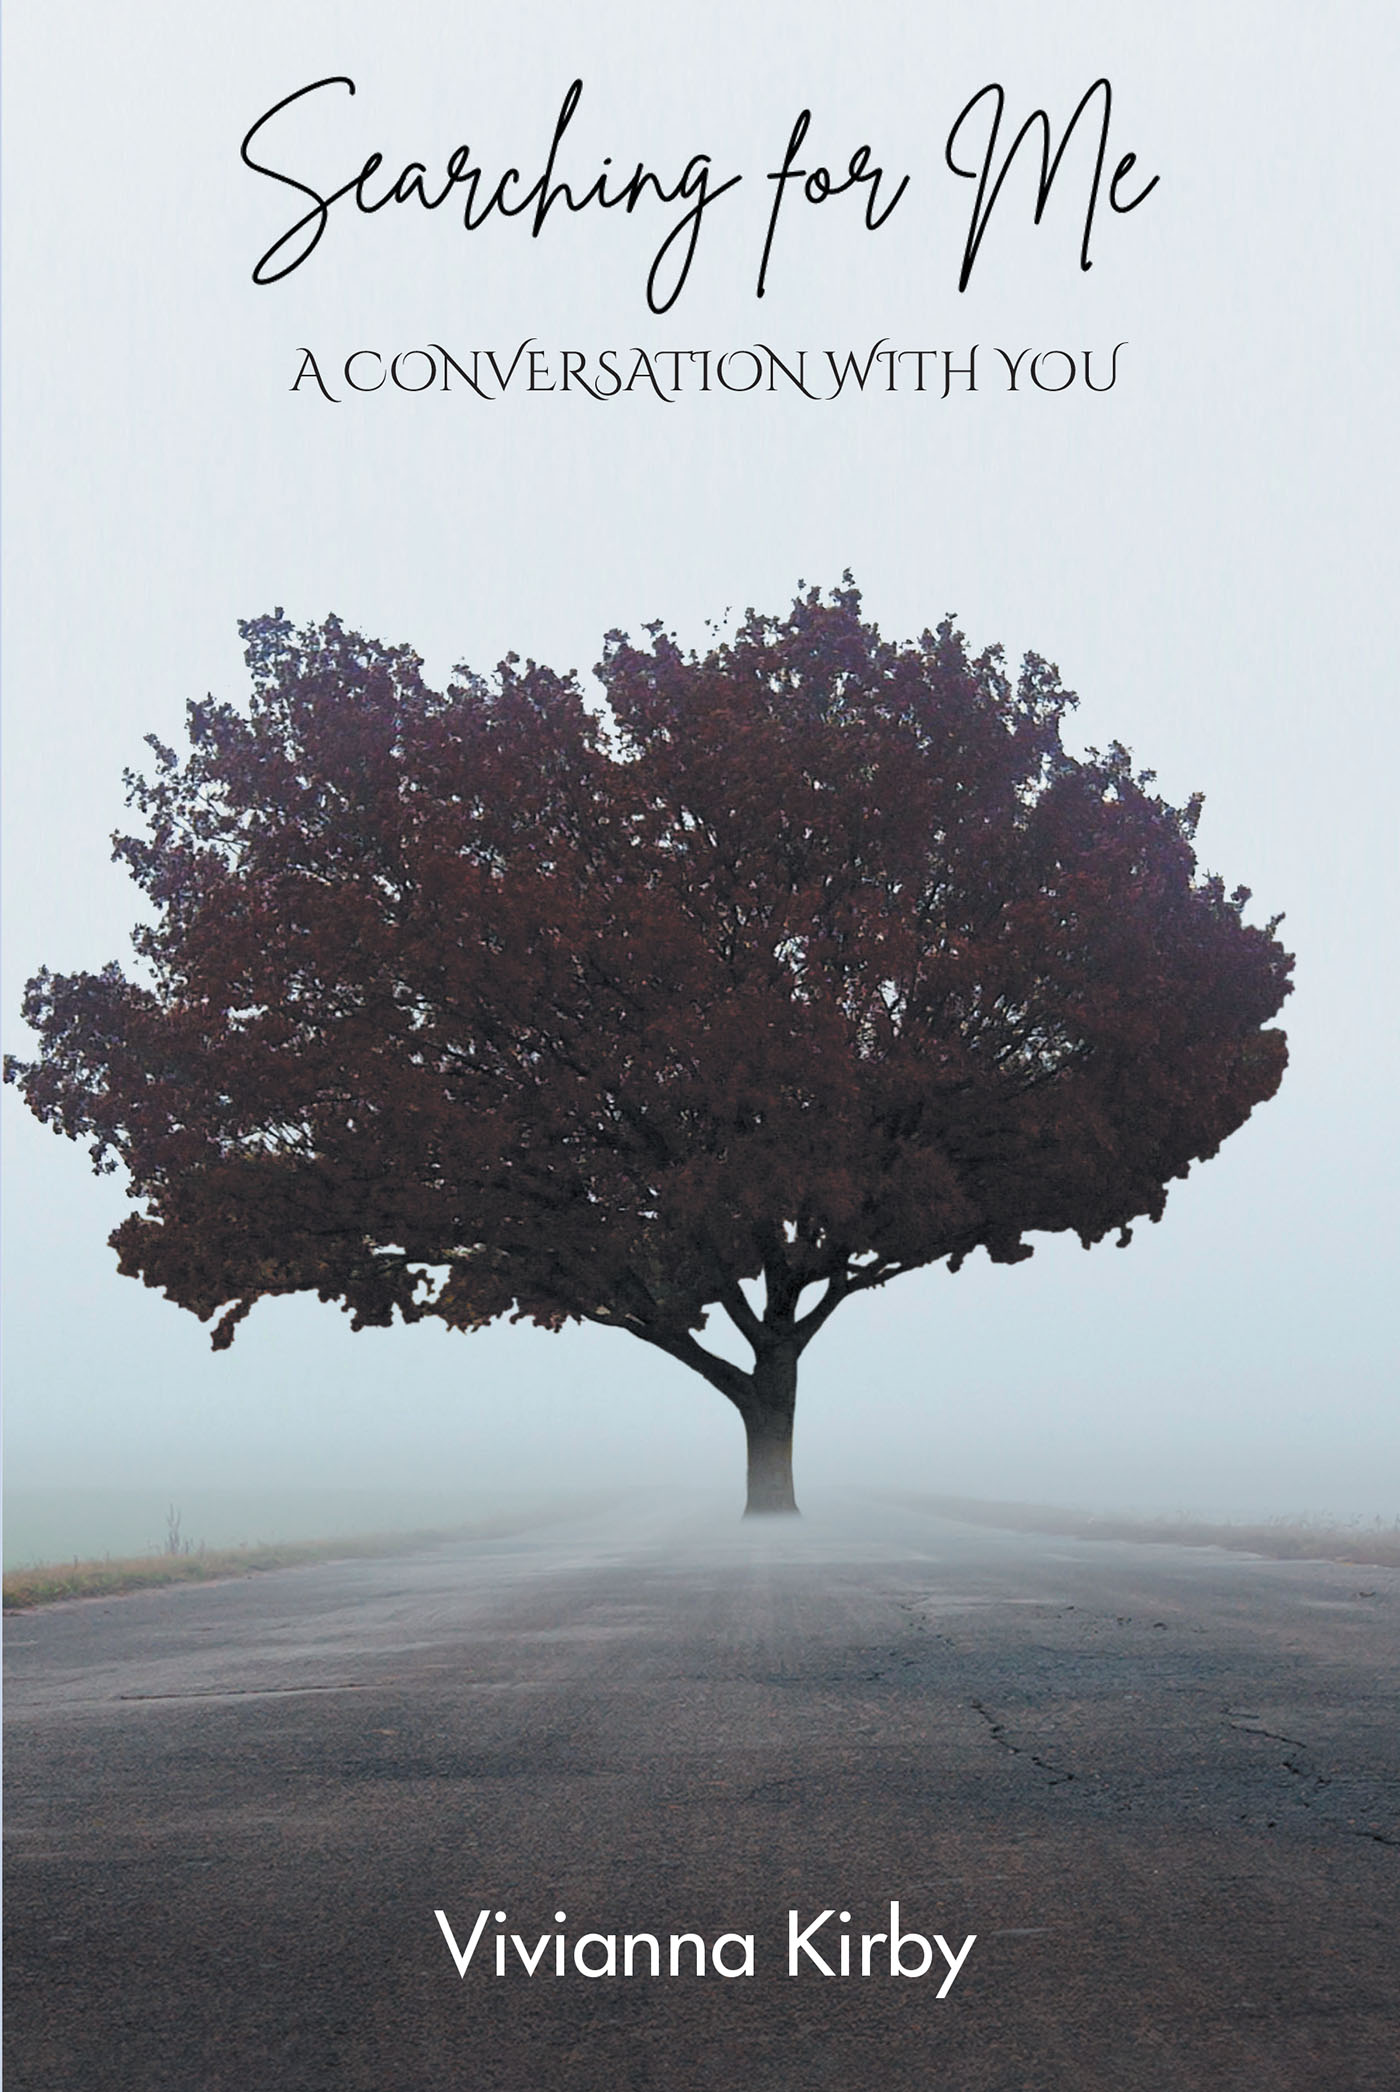 Author Vivianna Kirby’s New Book, "Searching for Me: A Conversation with You," is a Faith-Based Memoir That Follows the Author Through Her Path of Self-Discovery with God